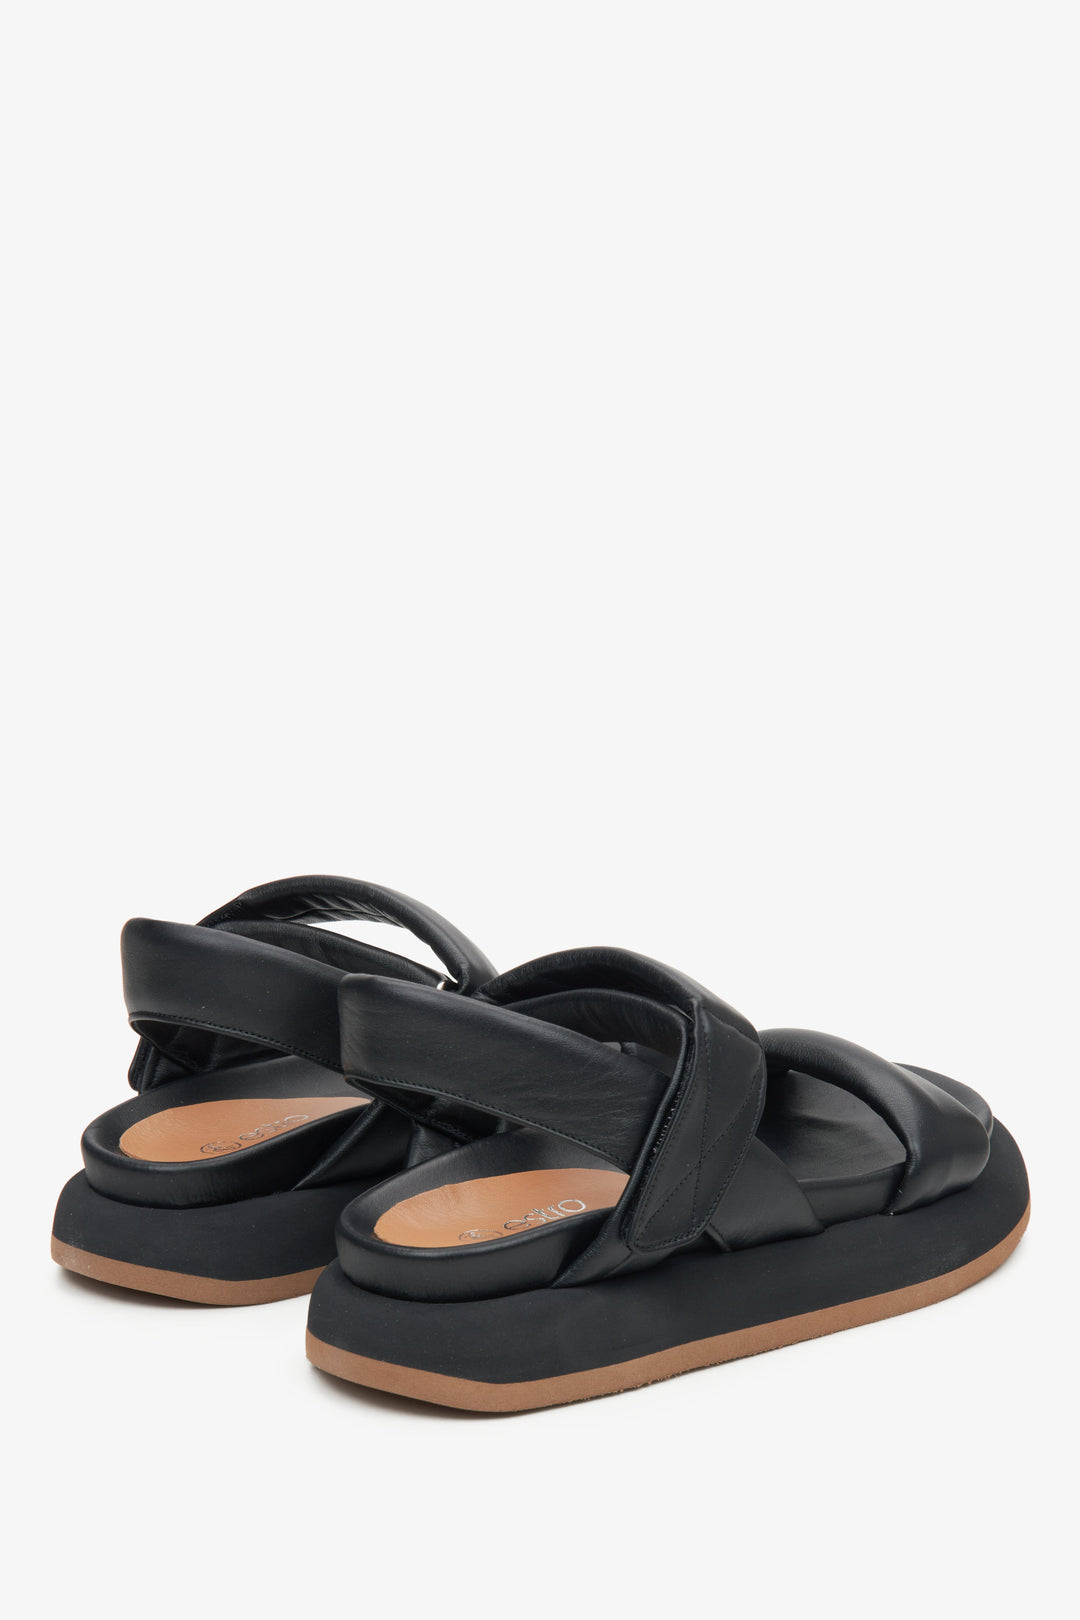 Women's black leather sandals with soft straps by Estro.